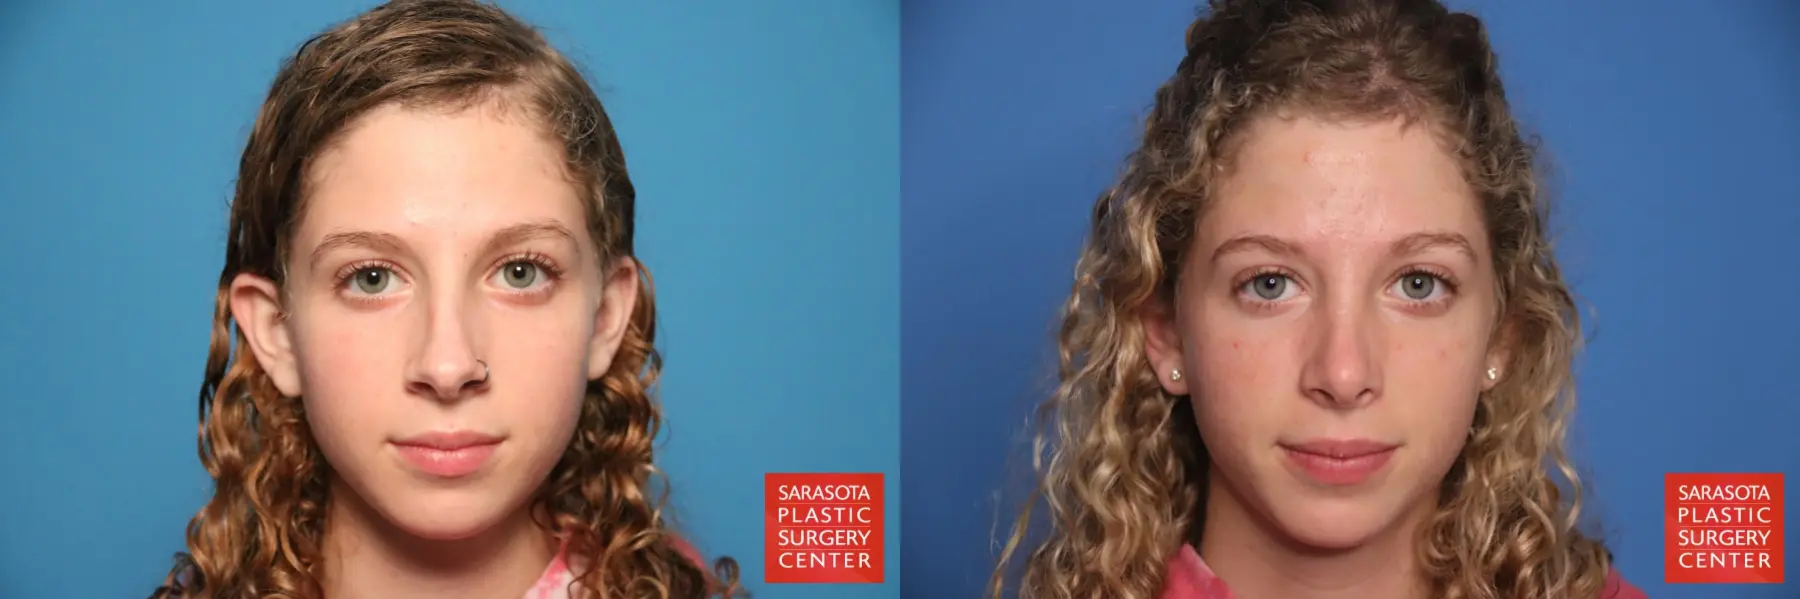 Rhinoplasty: Patient 7 - Before and After 1